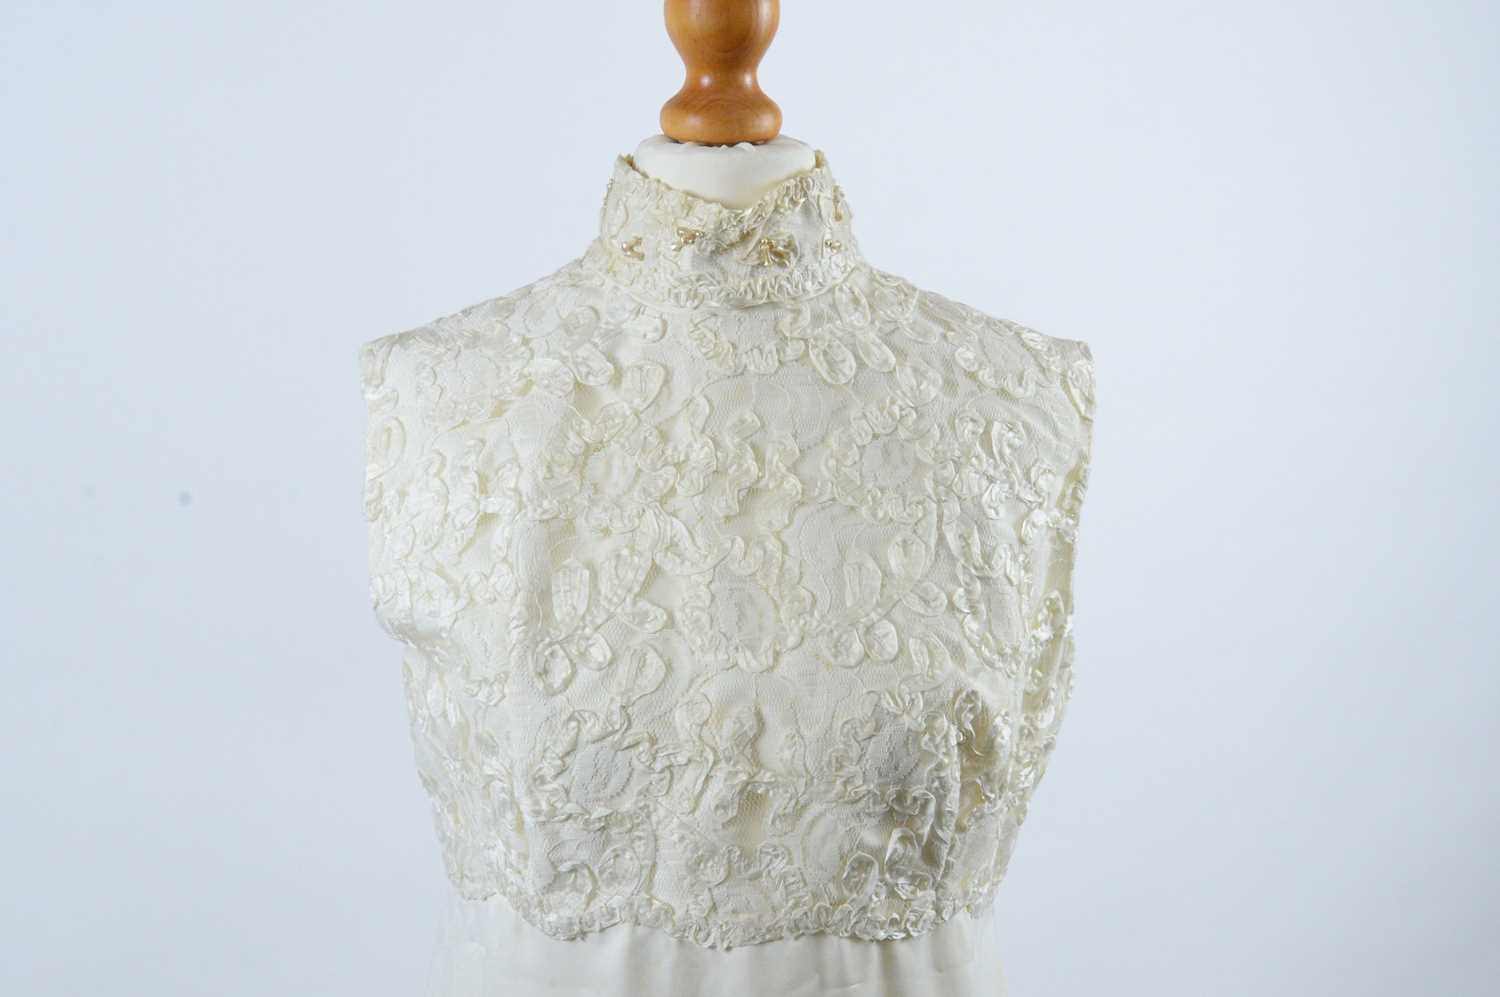 1960s two-piece champagne satin and lace wedding dress - Image 3 of 5